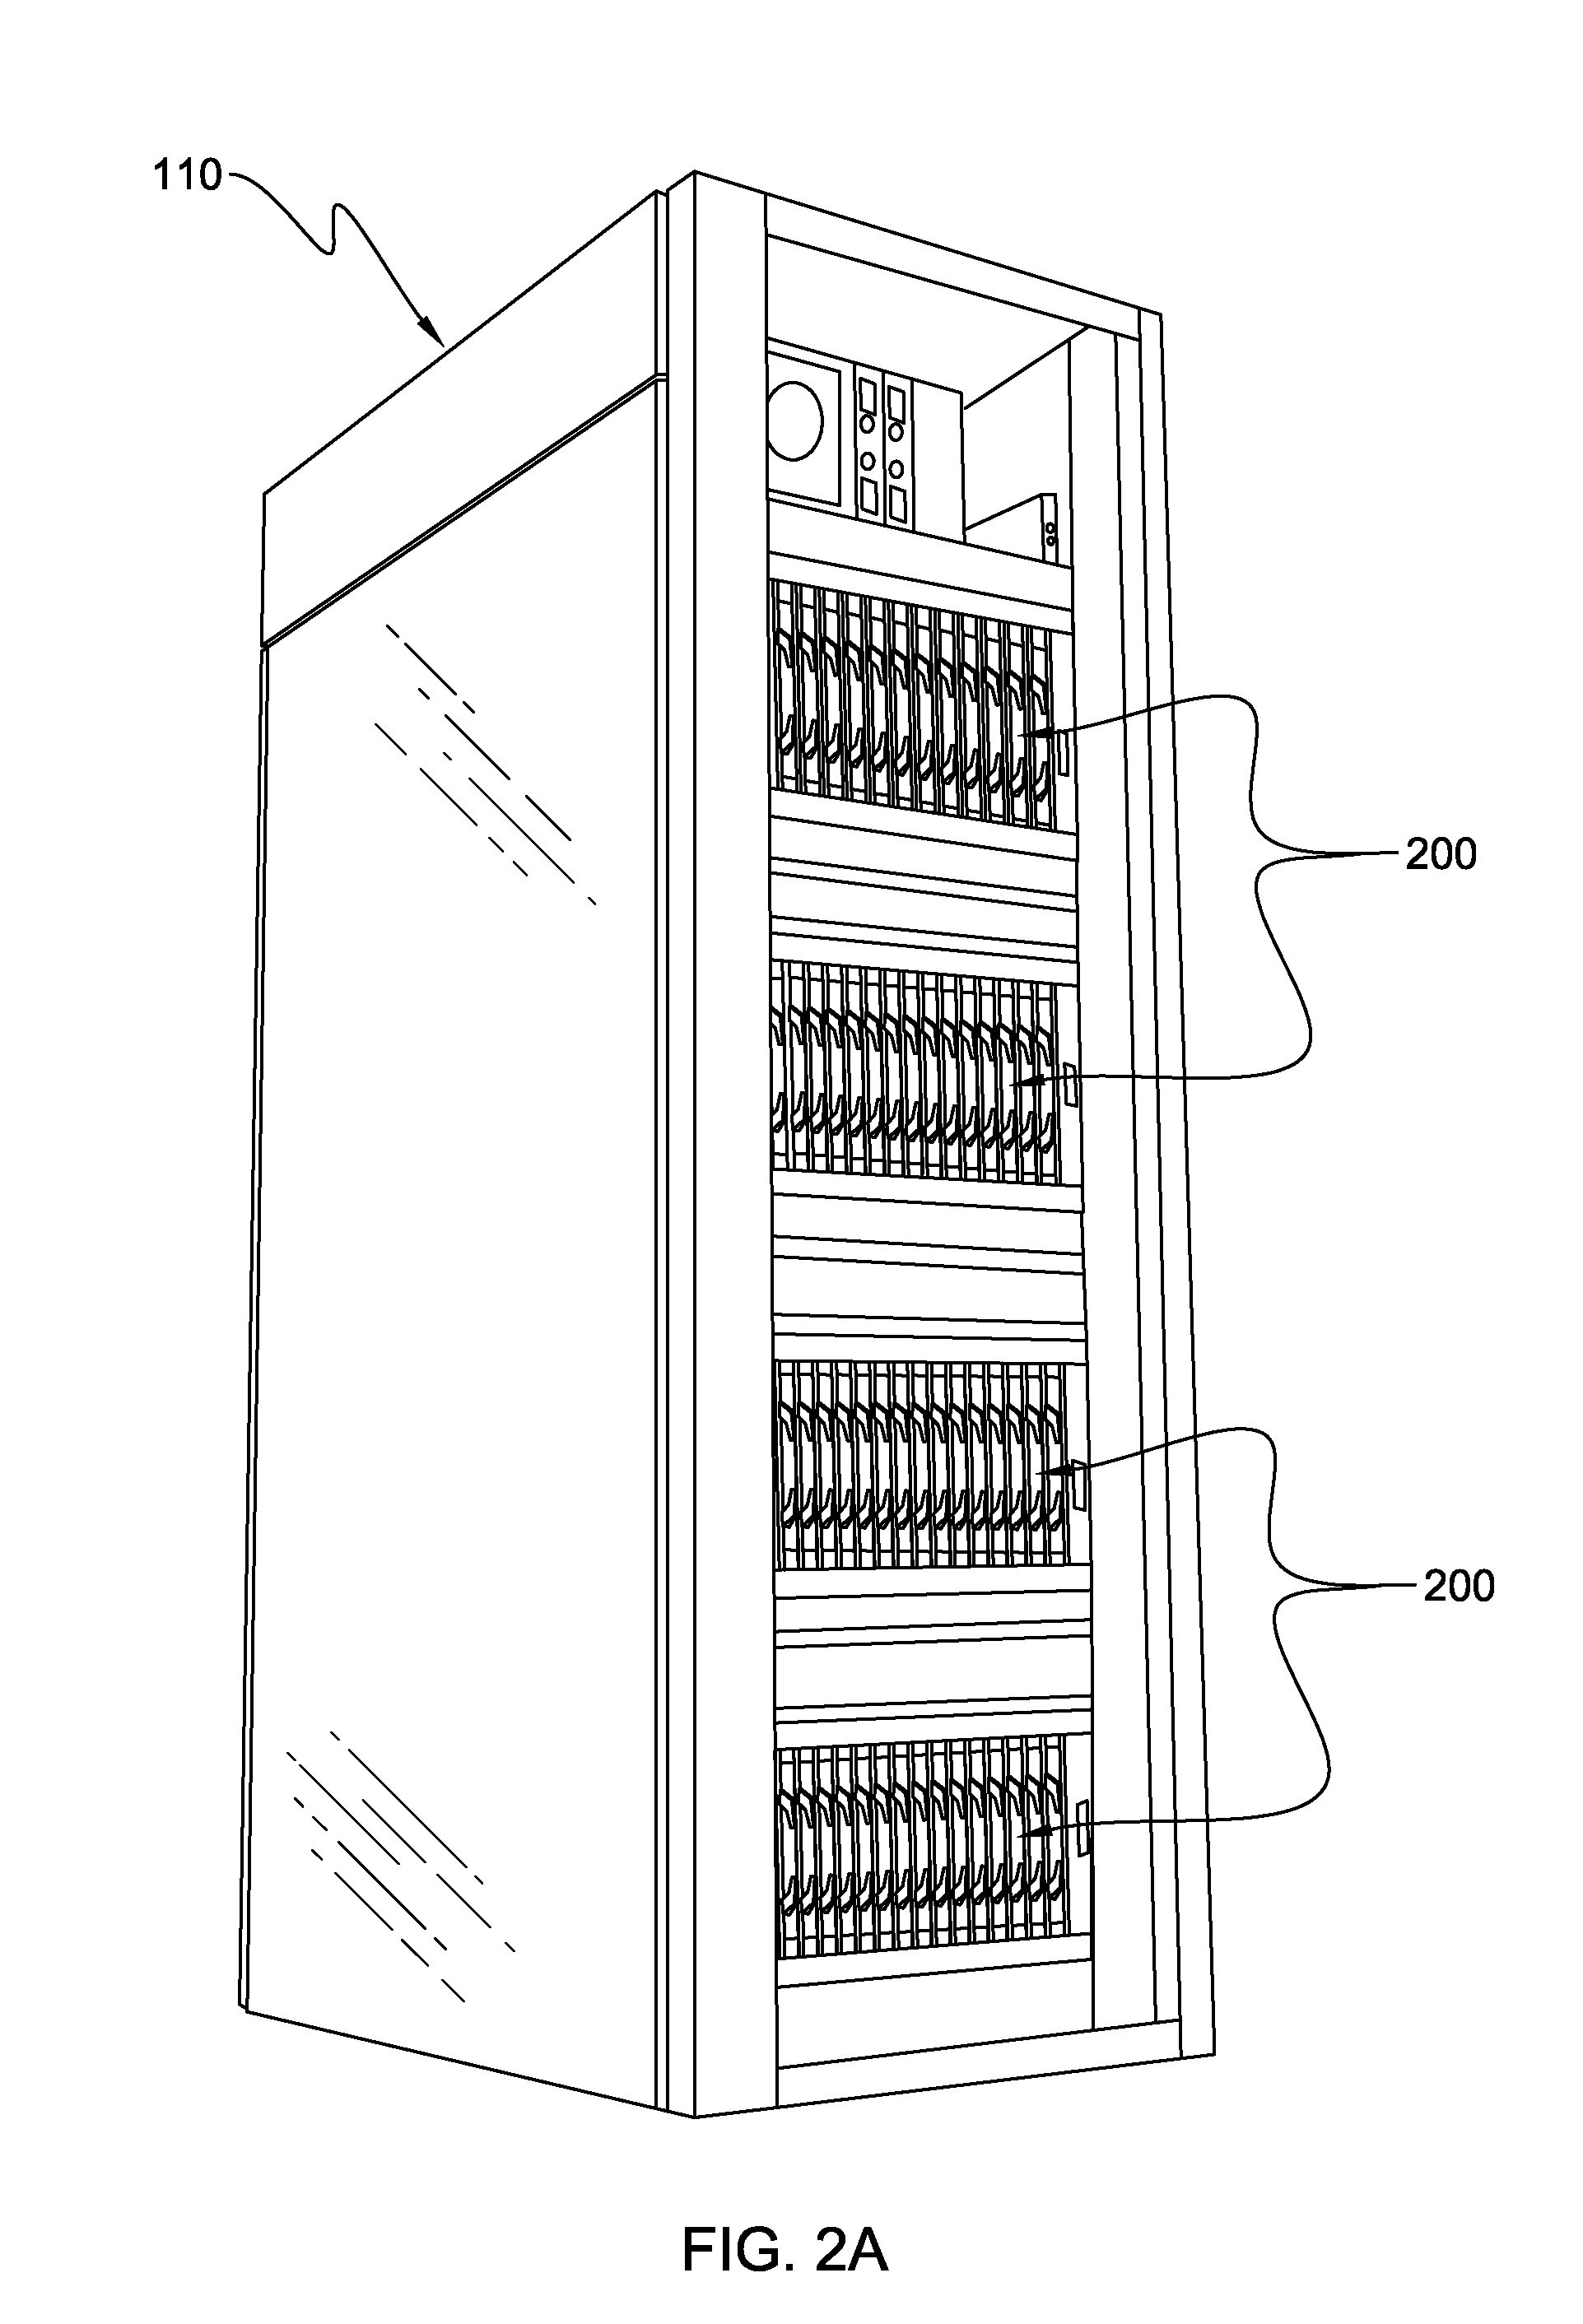 Liquid-cooled electronics rack with immersion-cooled electronic subsystems